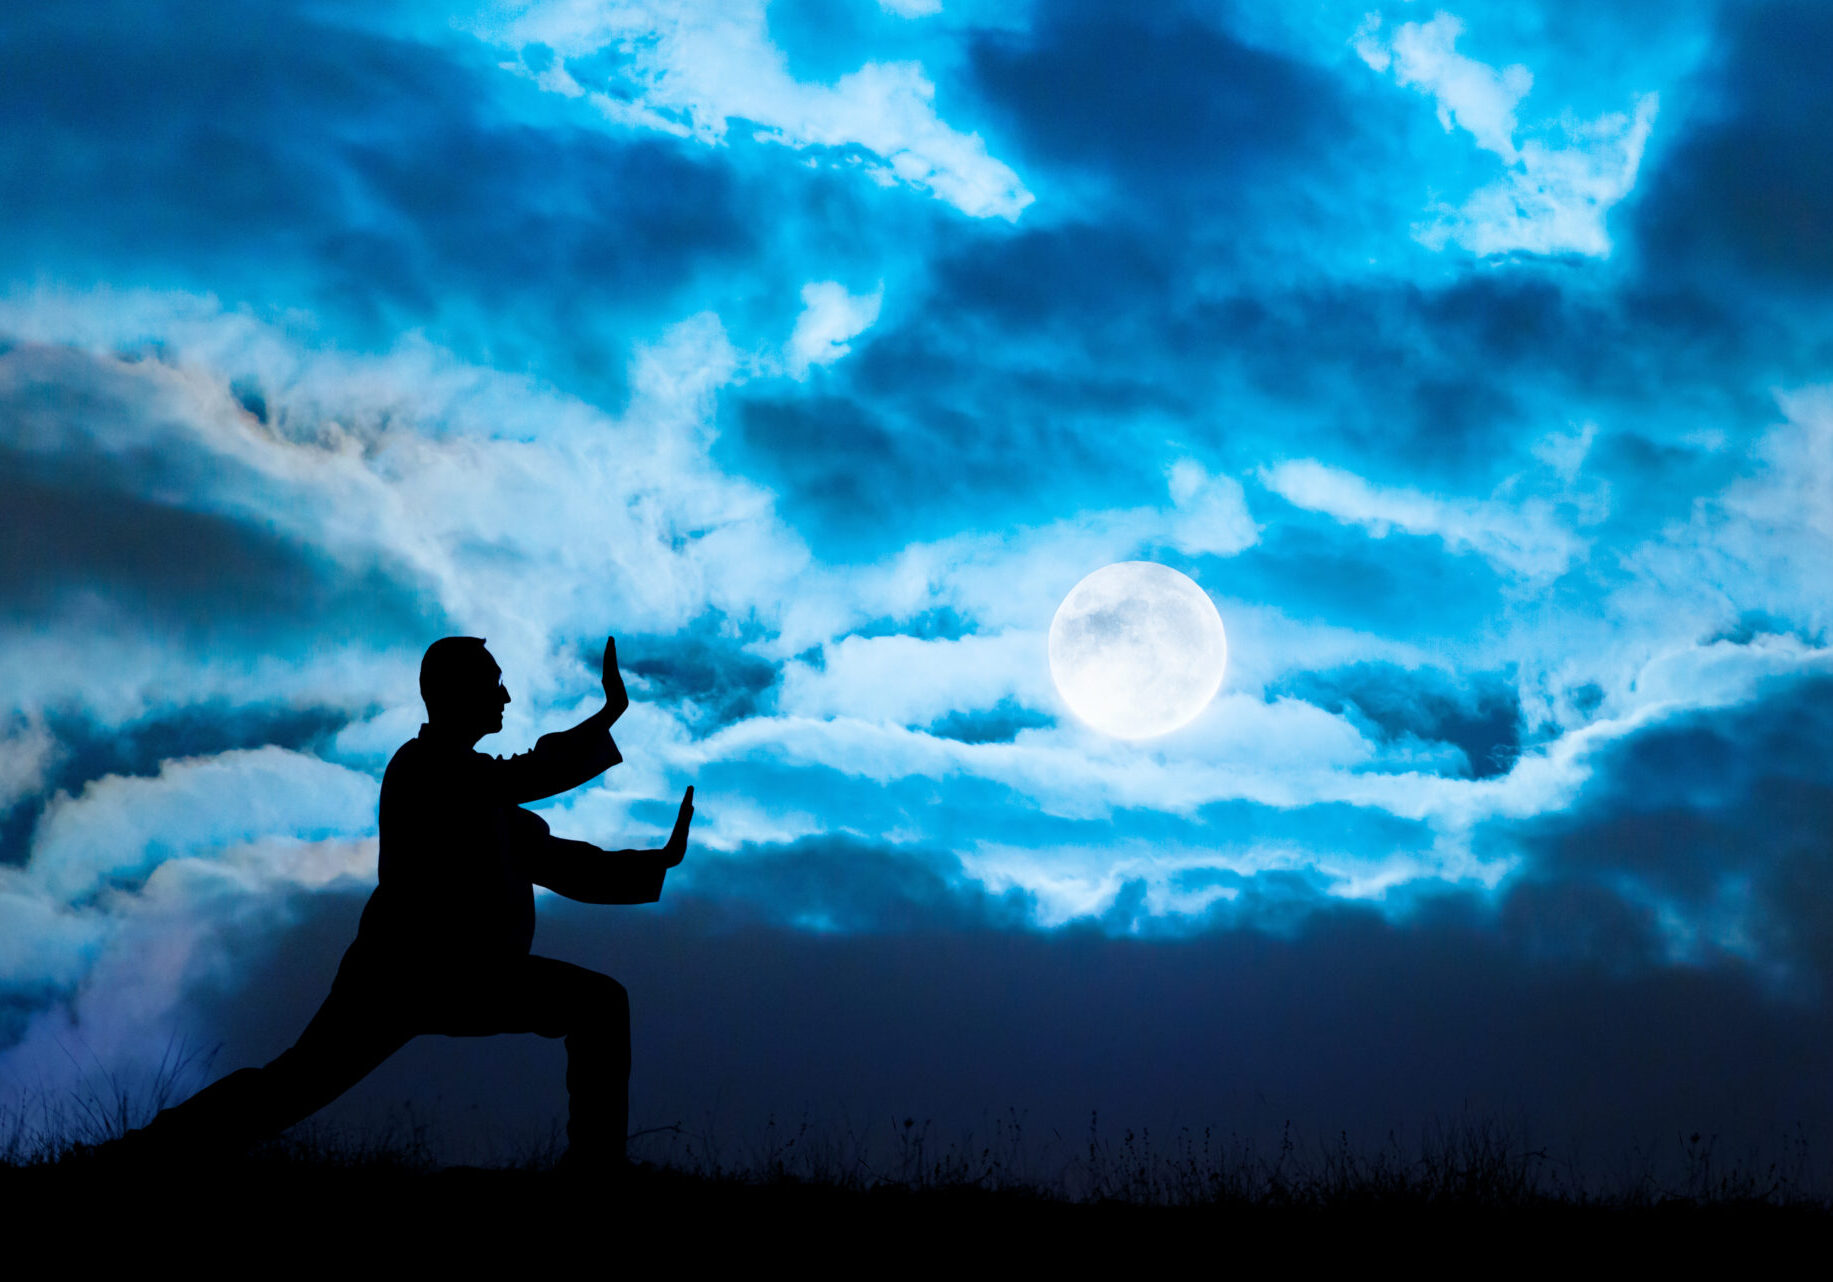 Man performs Tai Chi sport under moonlight. Tai Chi is a old Chinese martial art practiced for both its defense training and its health benefits. Its full name is Tai Chi Chuan. Tai Chi is a meditation sport for many people living in the modern world. It is similar to kung fu; judo; aikido; taekwondo; Yoga; etc.